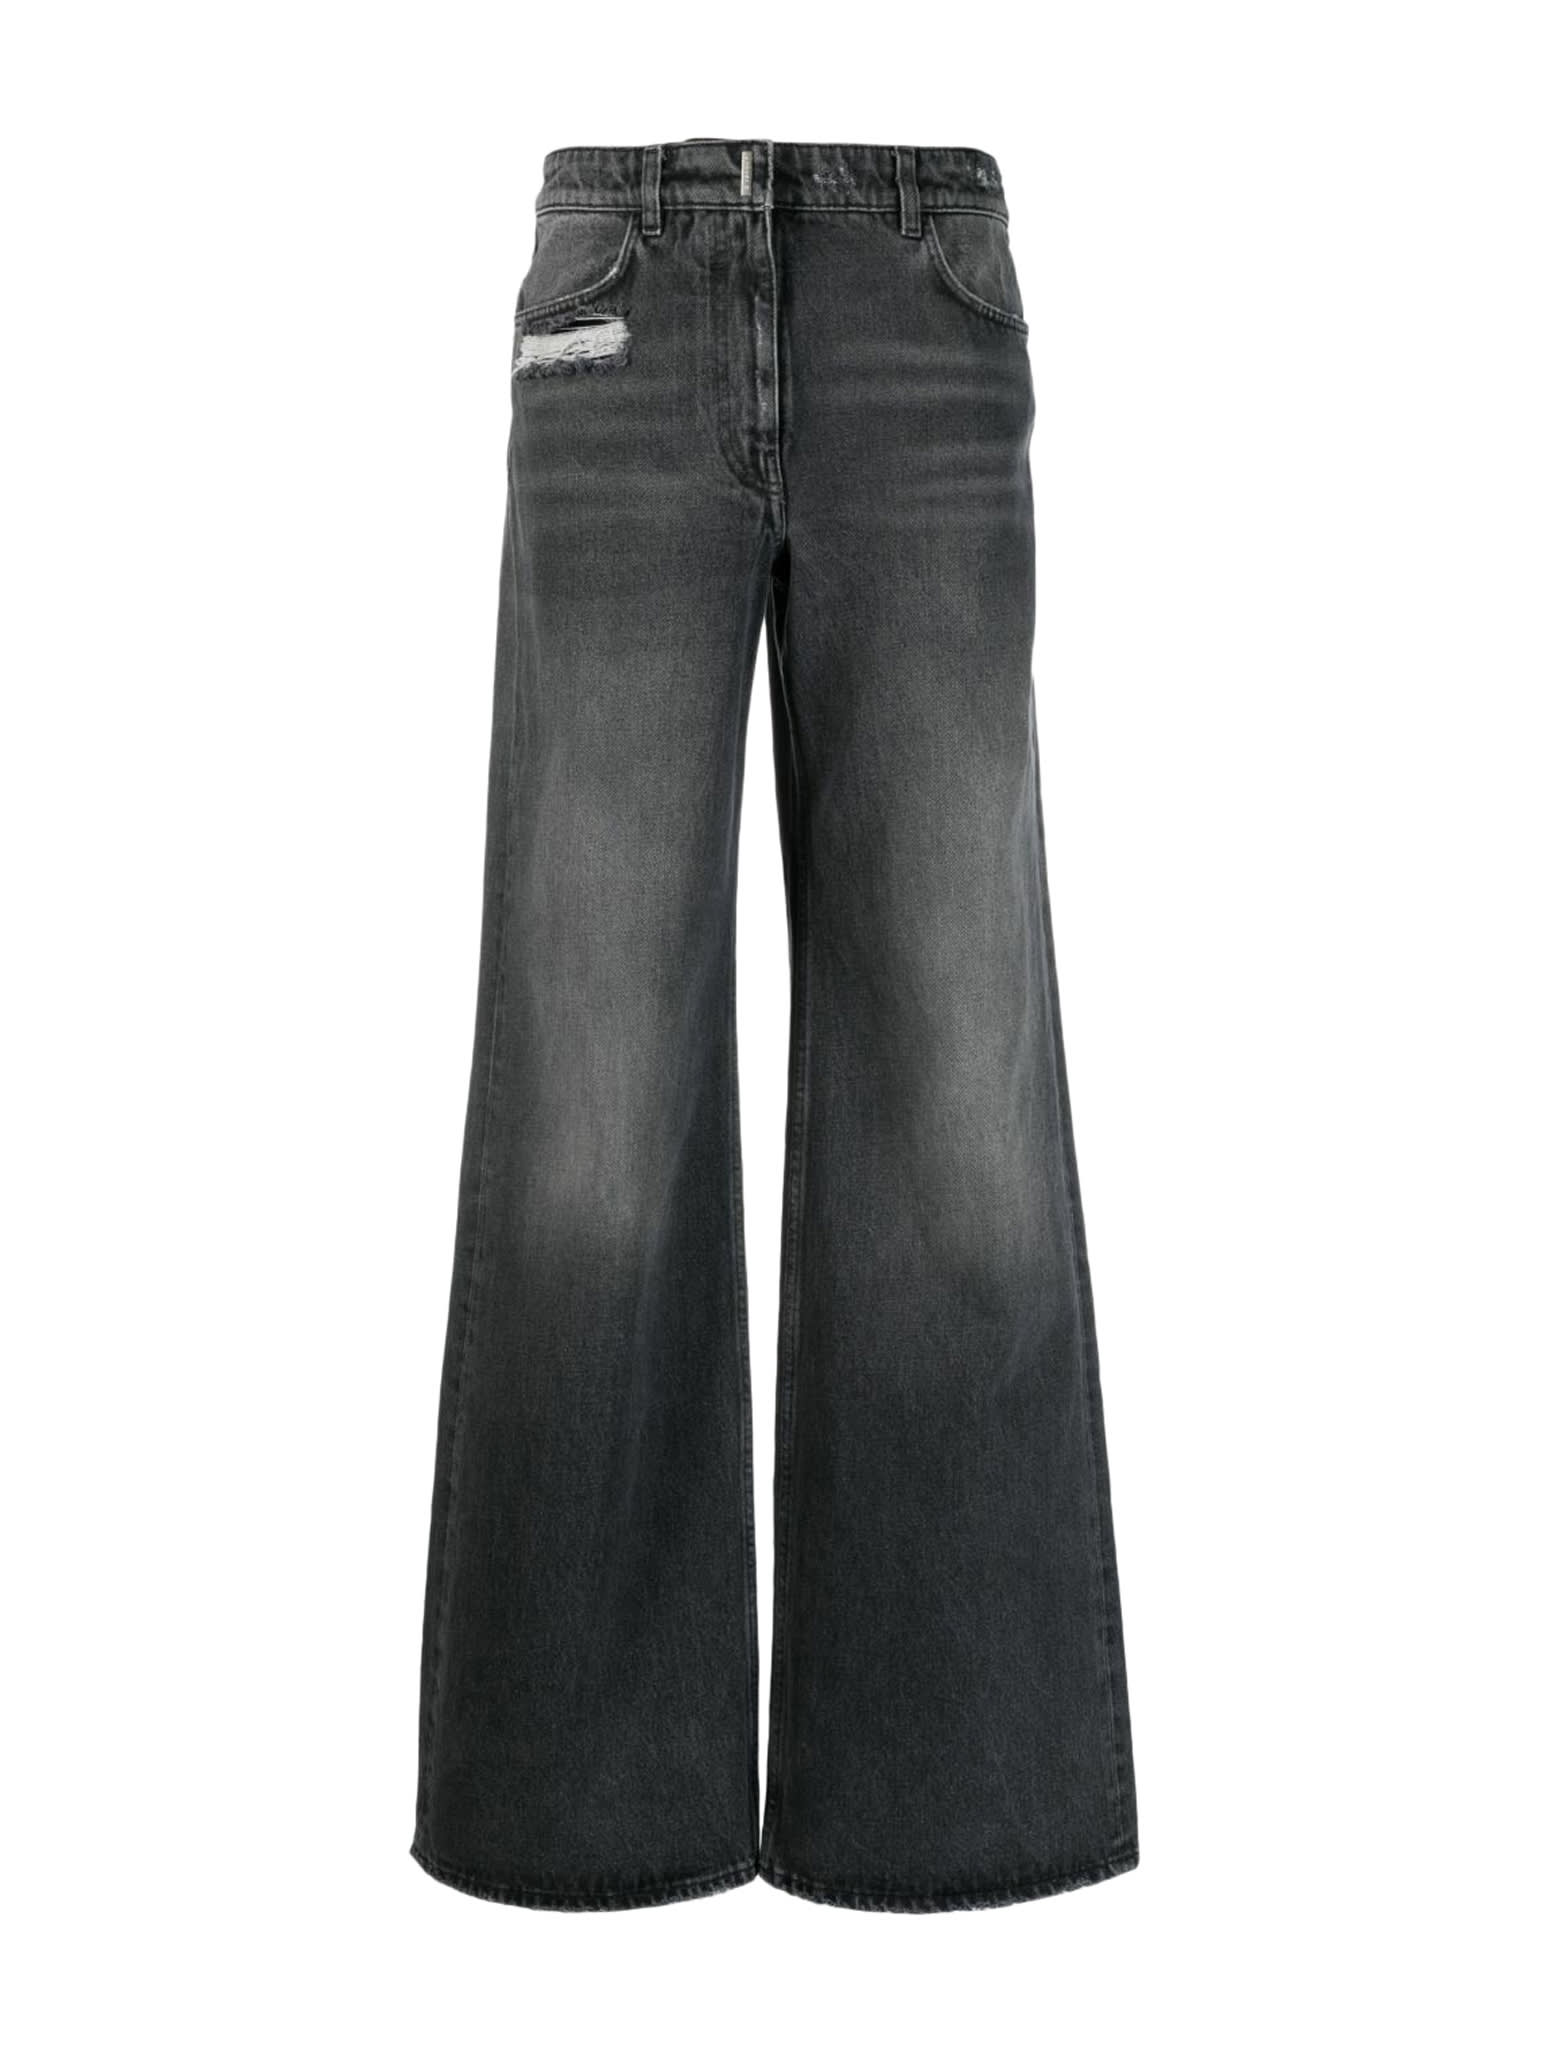 GIVENCHY EXTRA WIDE DENIM JEANS